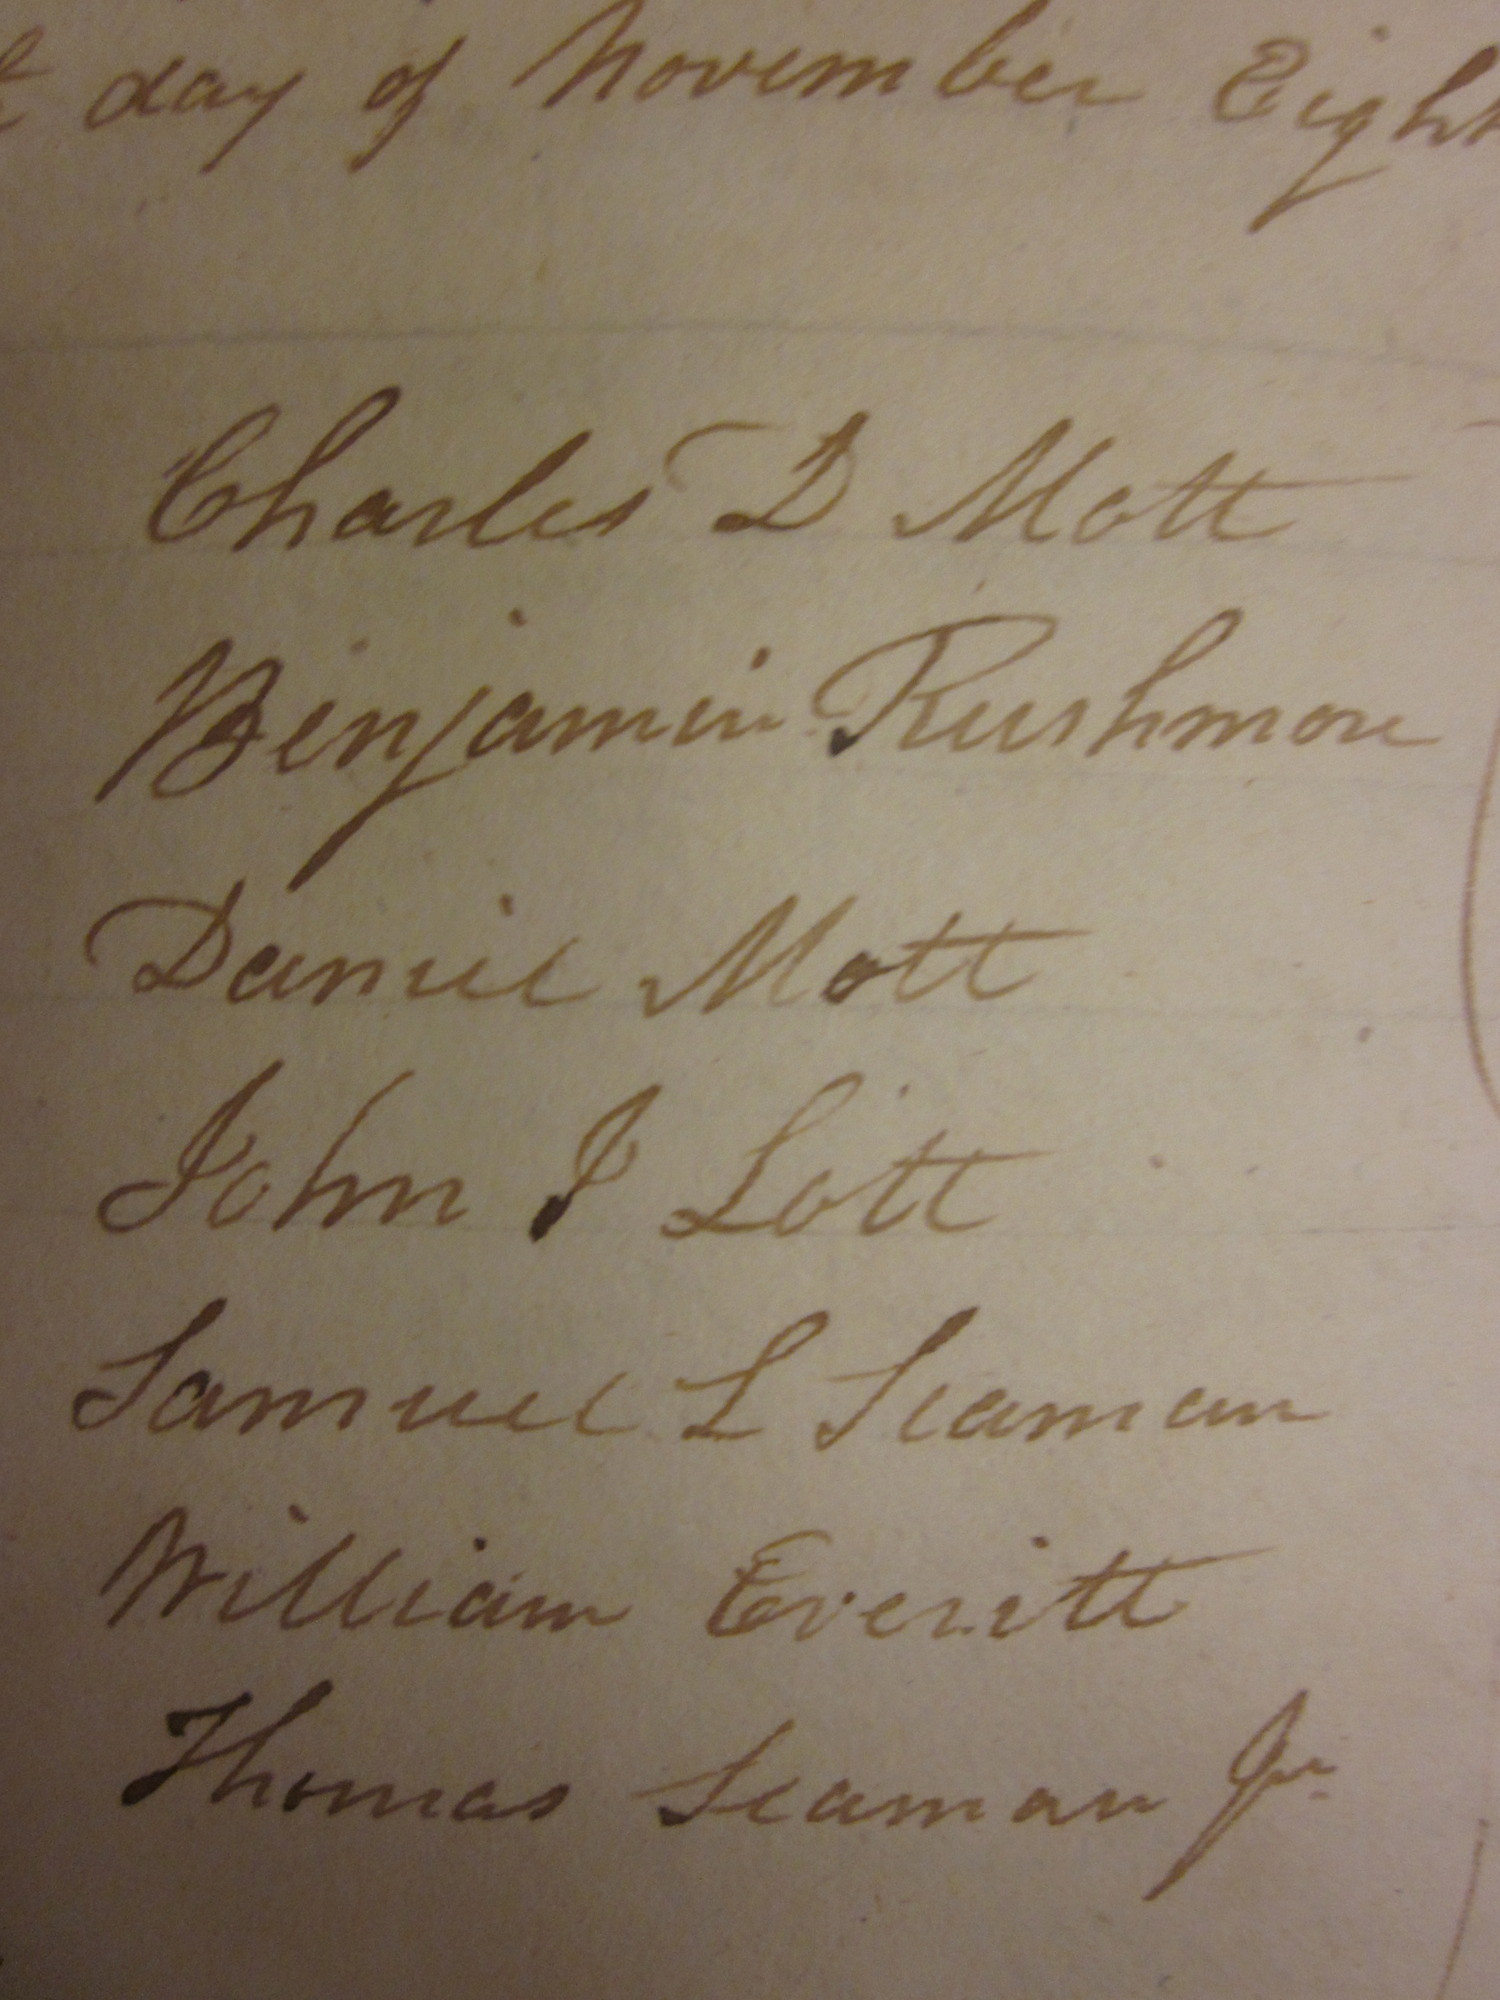 Signatures from some of the founding fathers of Hempstead, including Charles DeMott and Samuel Seaman.